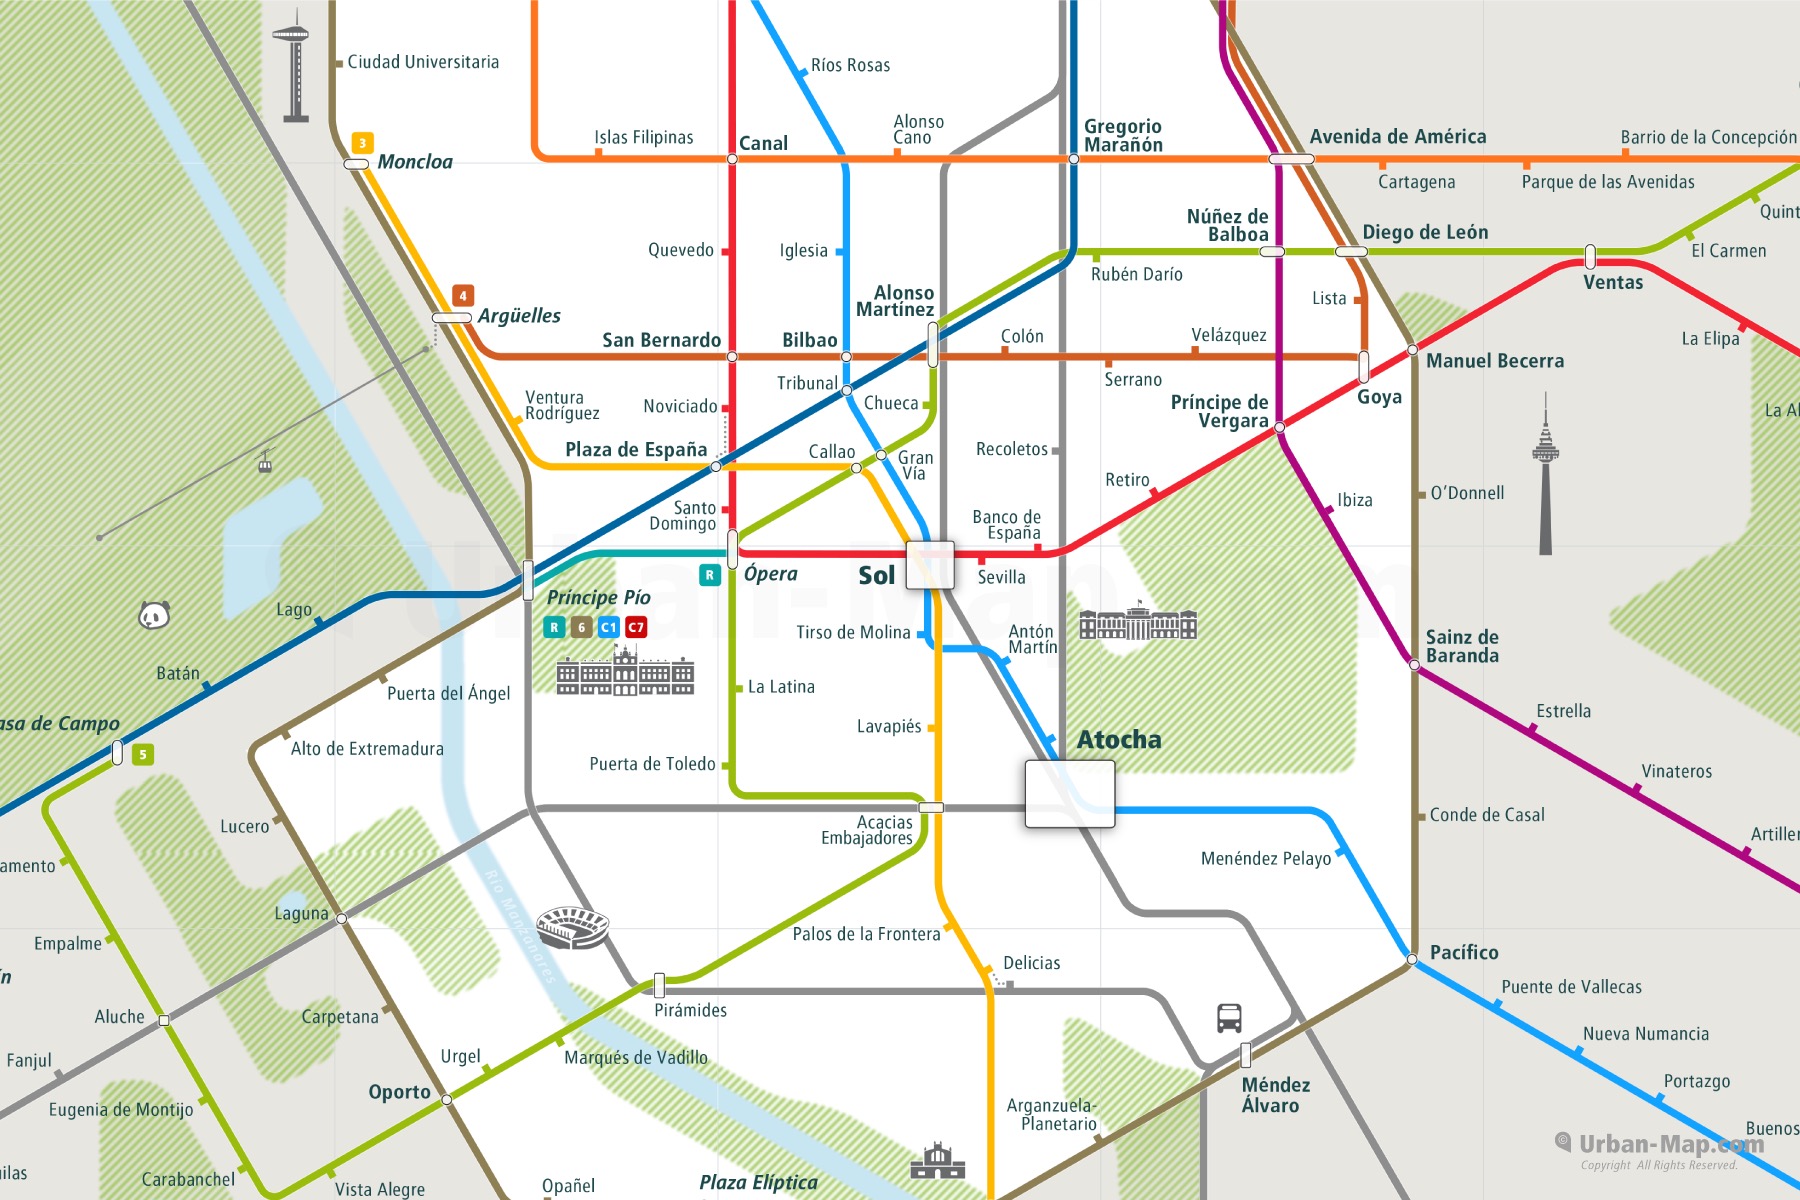 Madrid City Rail Map shows the train and public transportation routes of metro - Close-Up